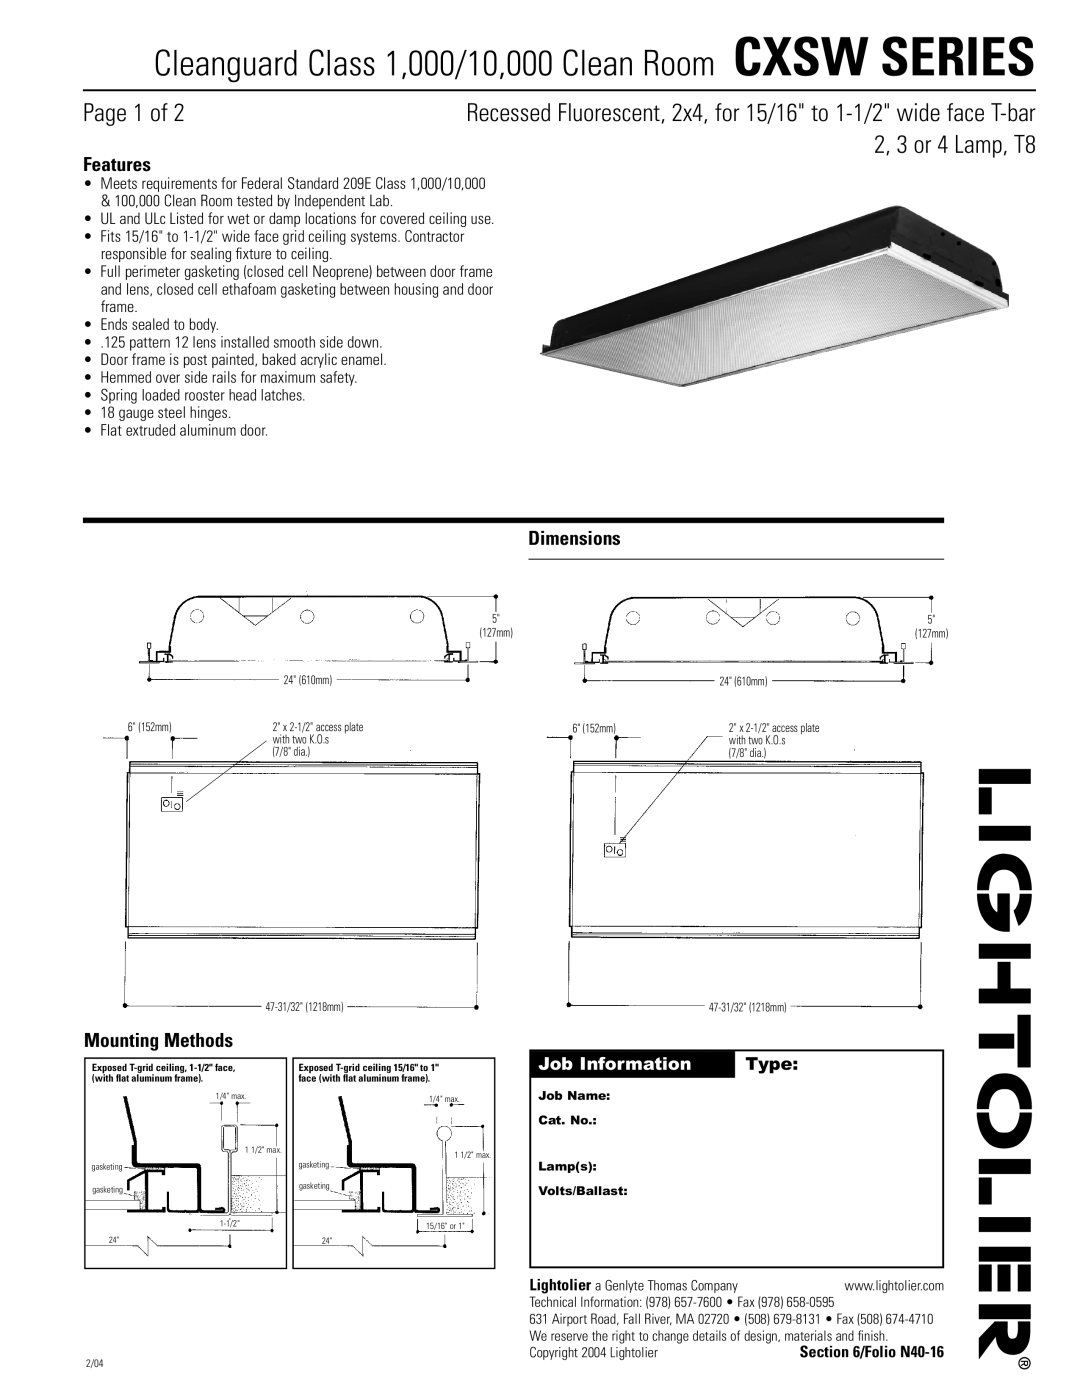 Lightolier CXSW SERIES dimensions Page 1 of, 2, 3 or 4 Lamp, T8, Features, Dimensions, Mounting Methods, Job Information 